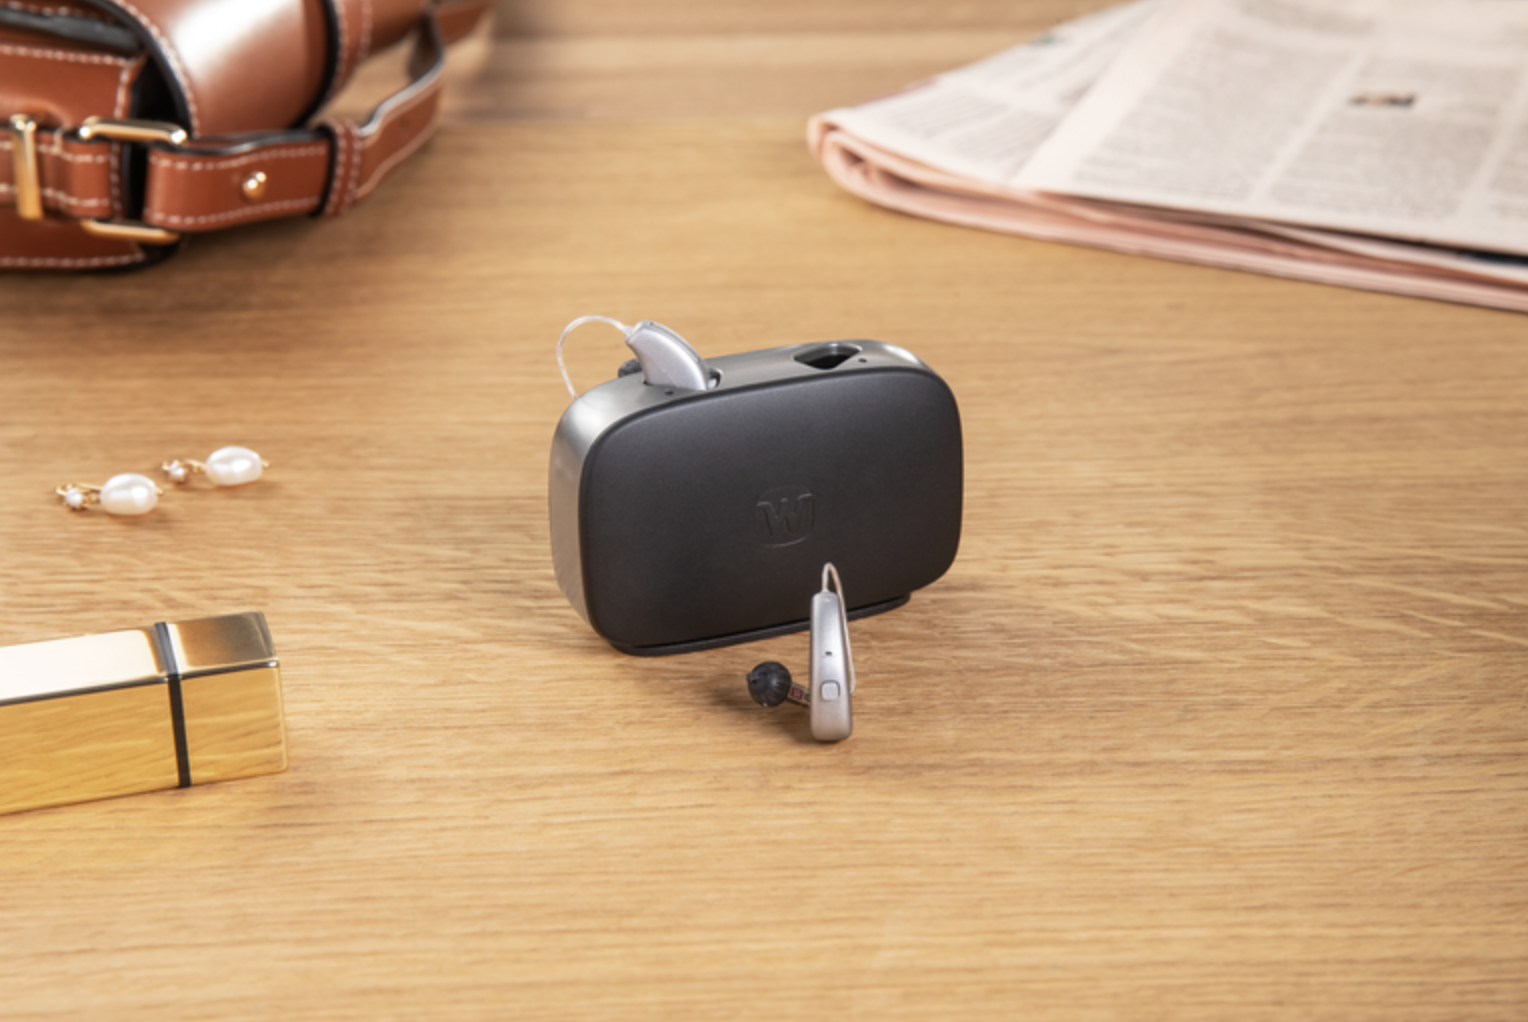 Widex hearing aids with charger